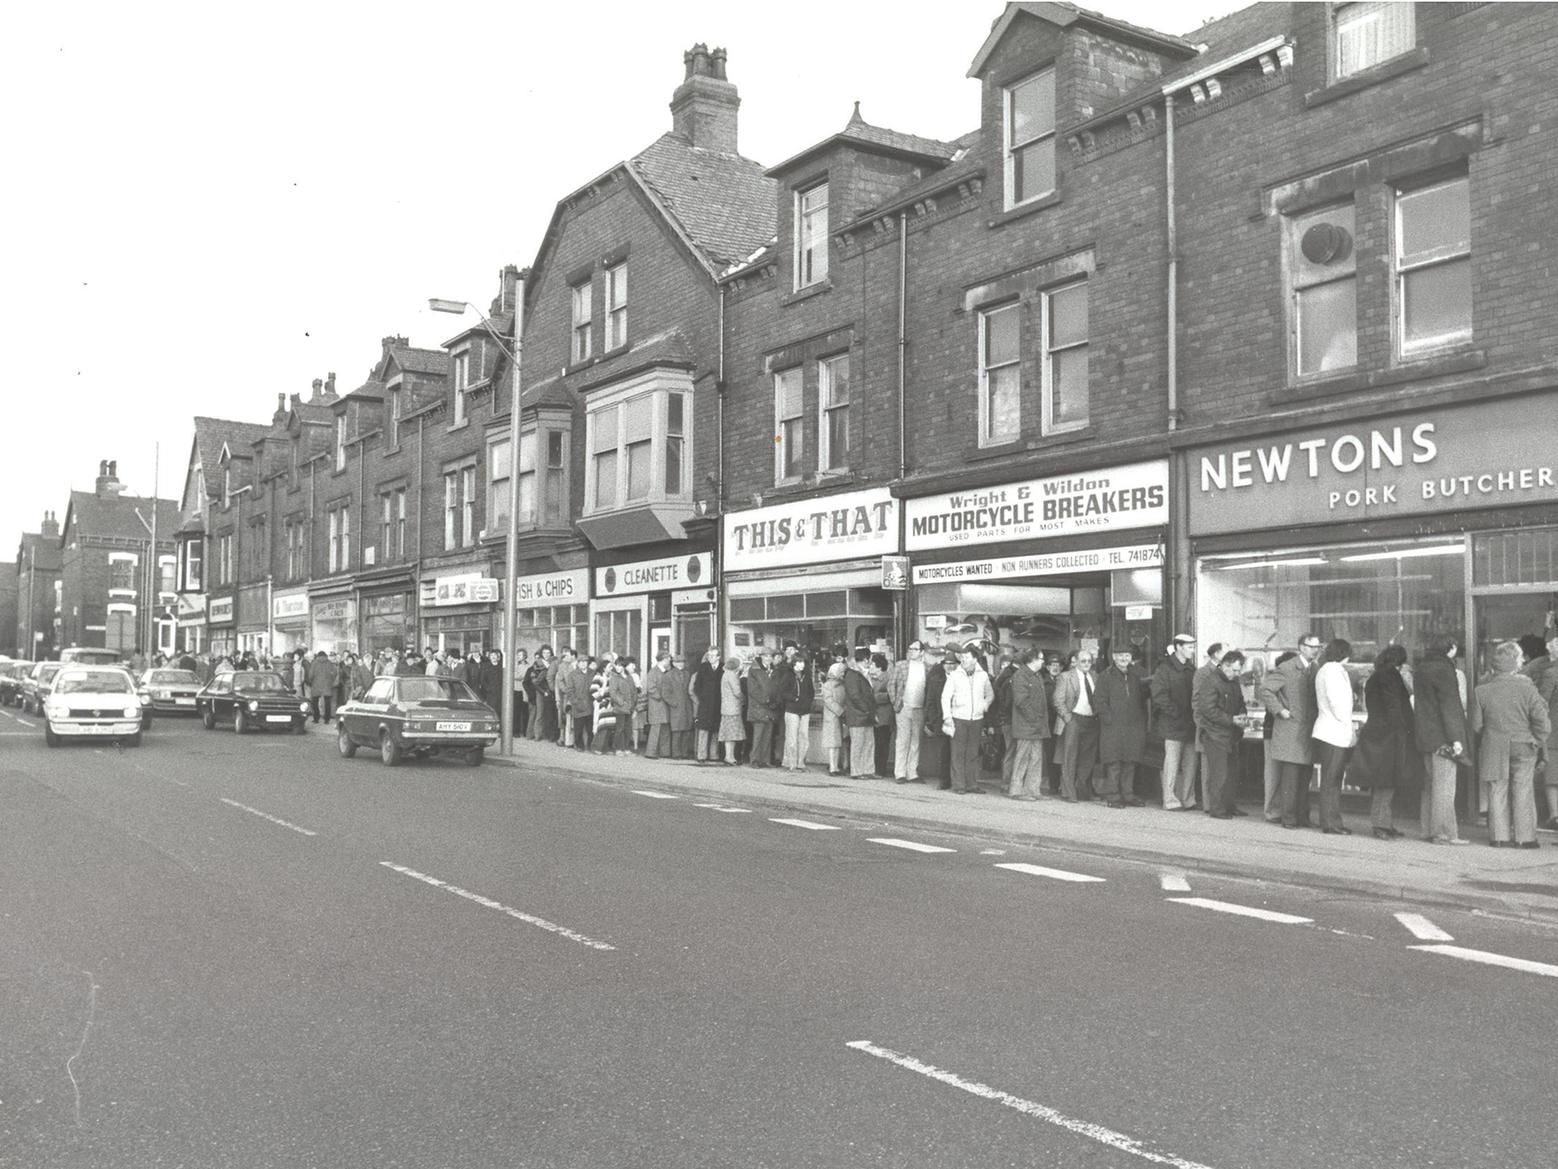 This queue stretched for more than 100 yards down Kirkstall Road. Shoppers were waiting patiently outside Newton's pork butchers shop to pick up their Christmas orders